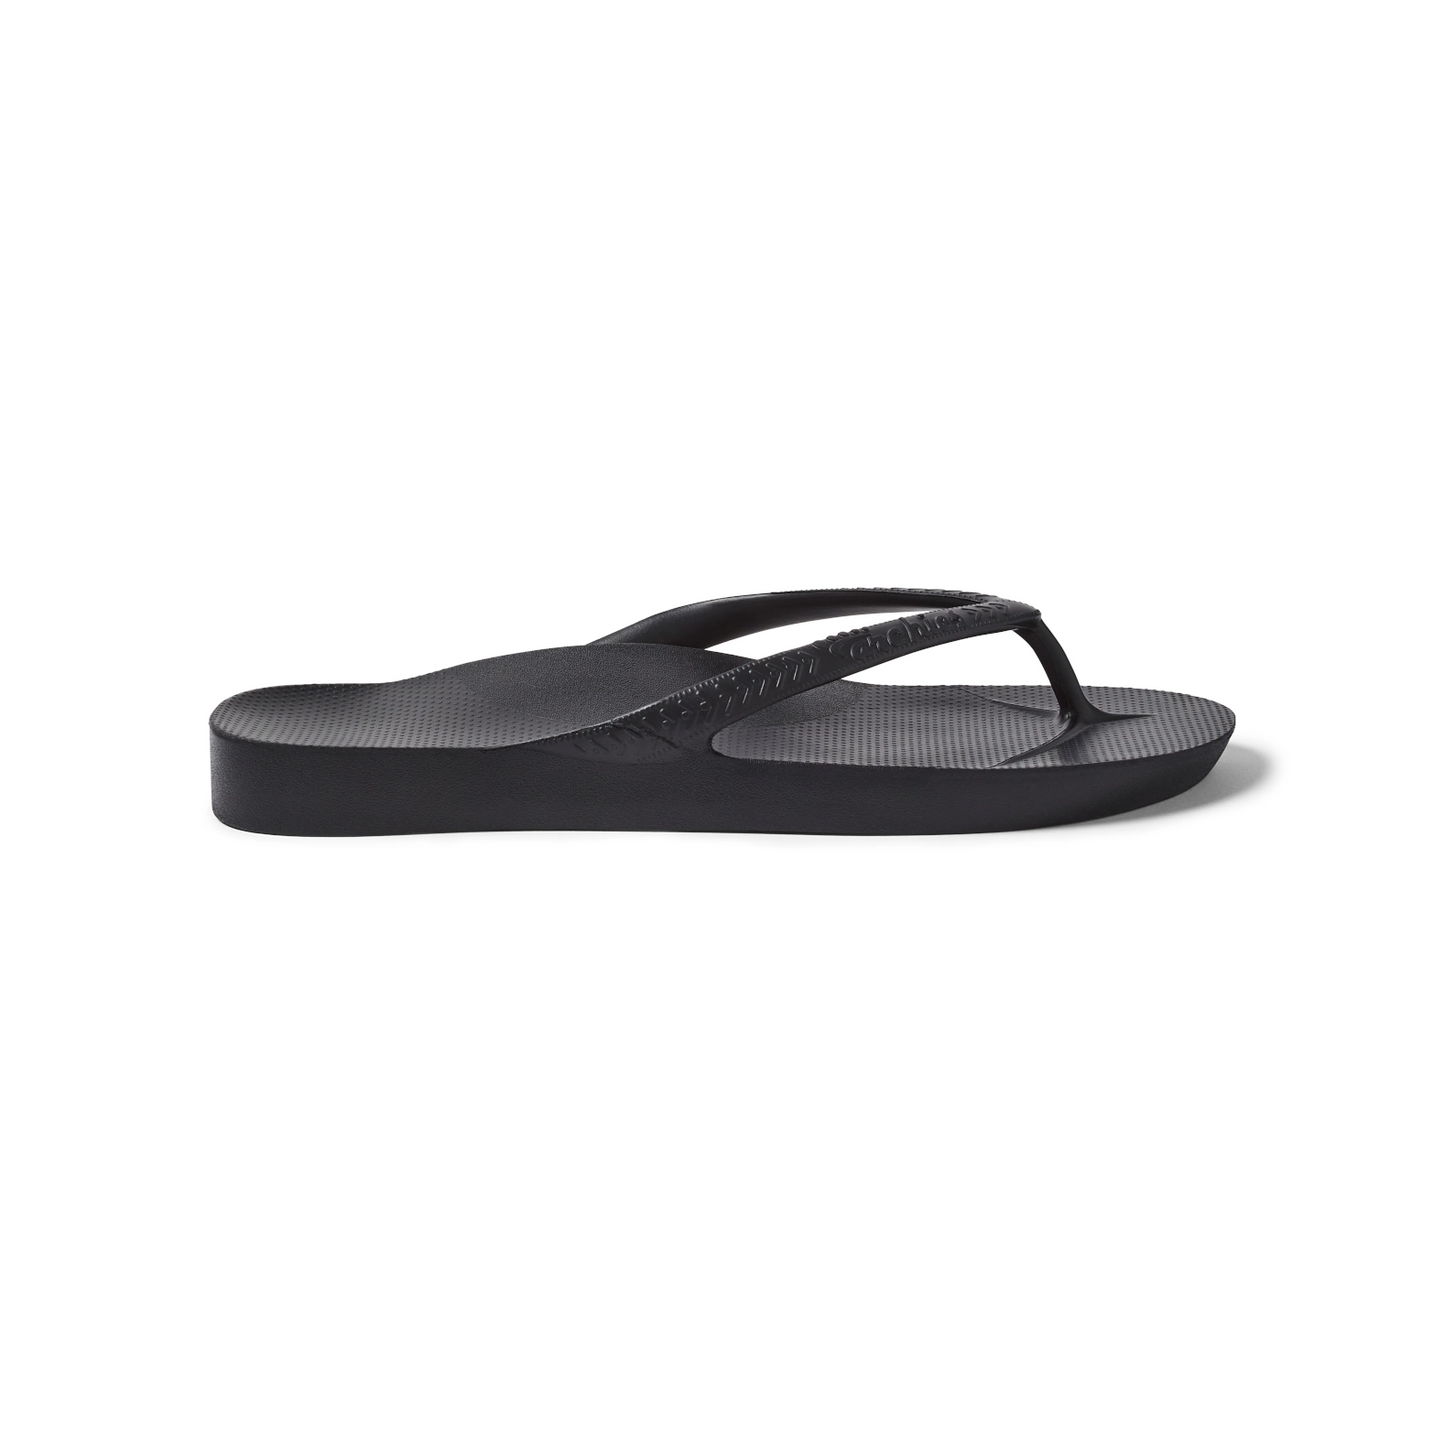 Arch Support Jandals Black